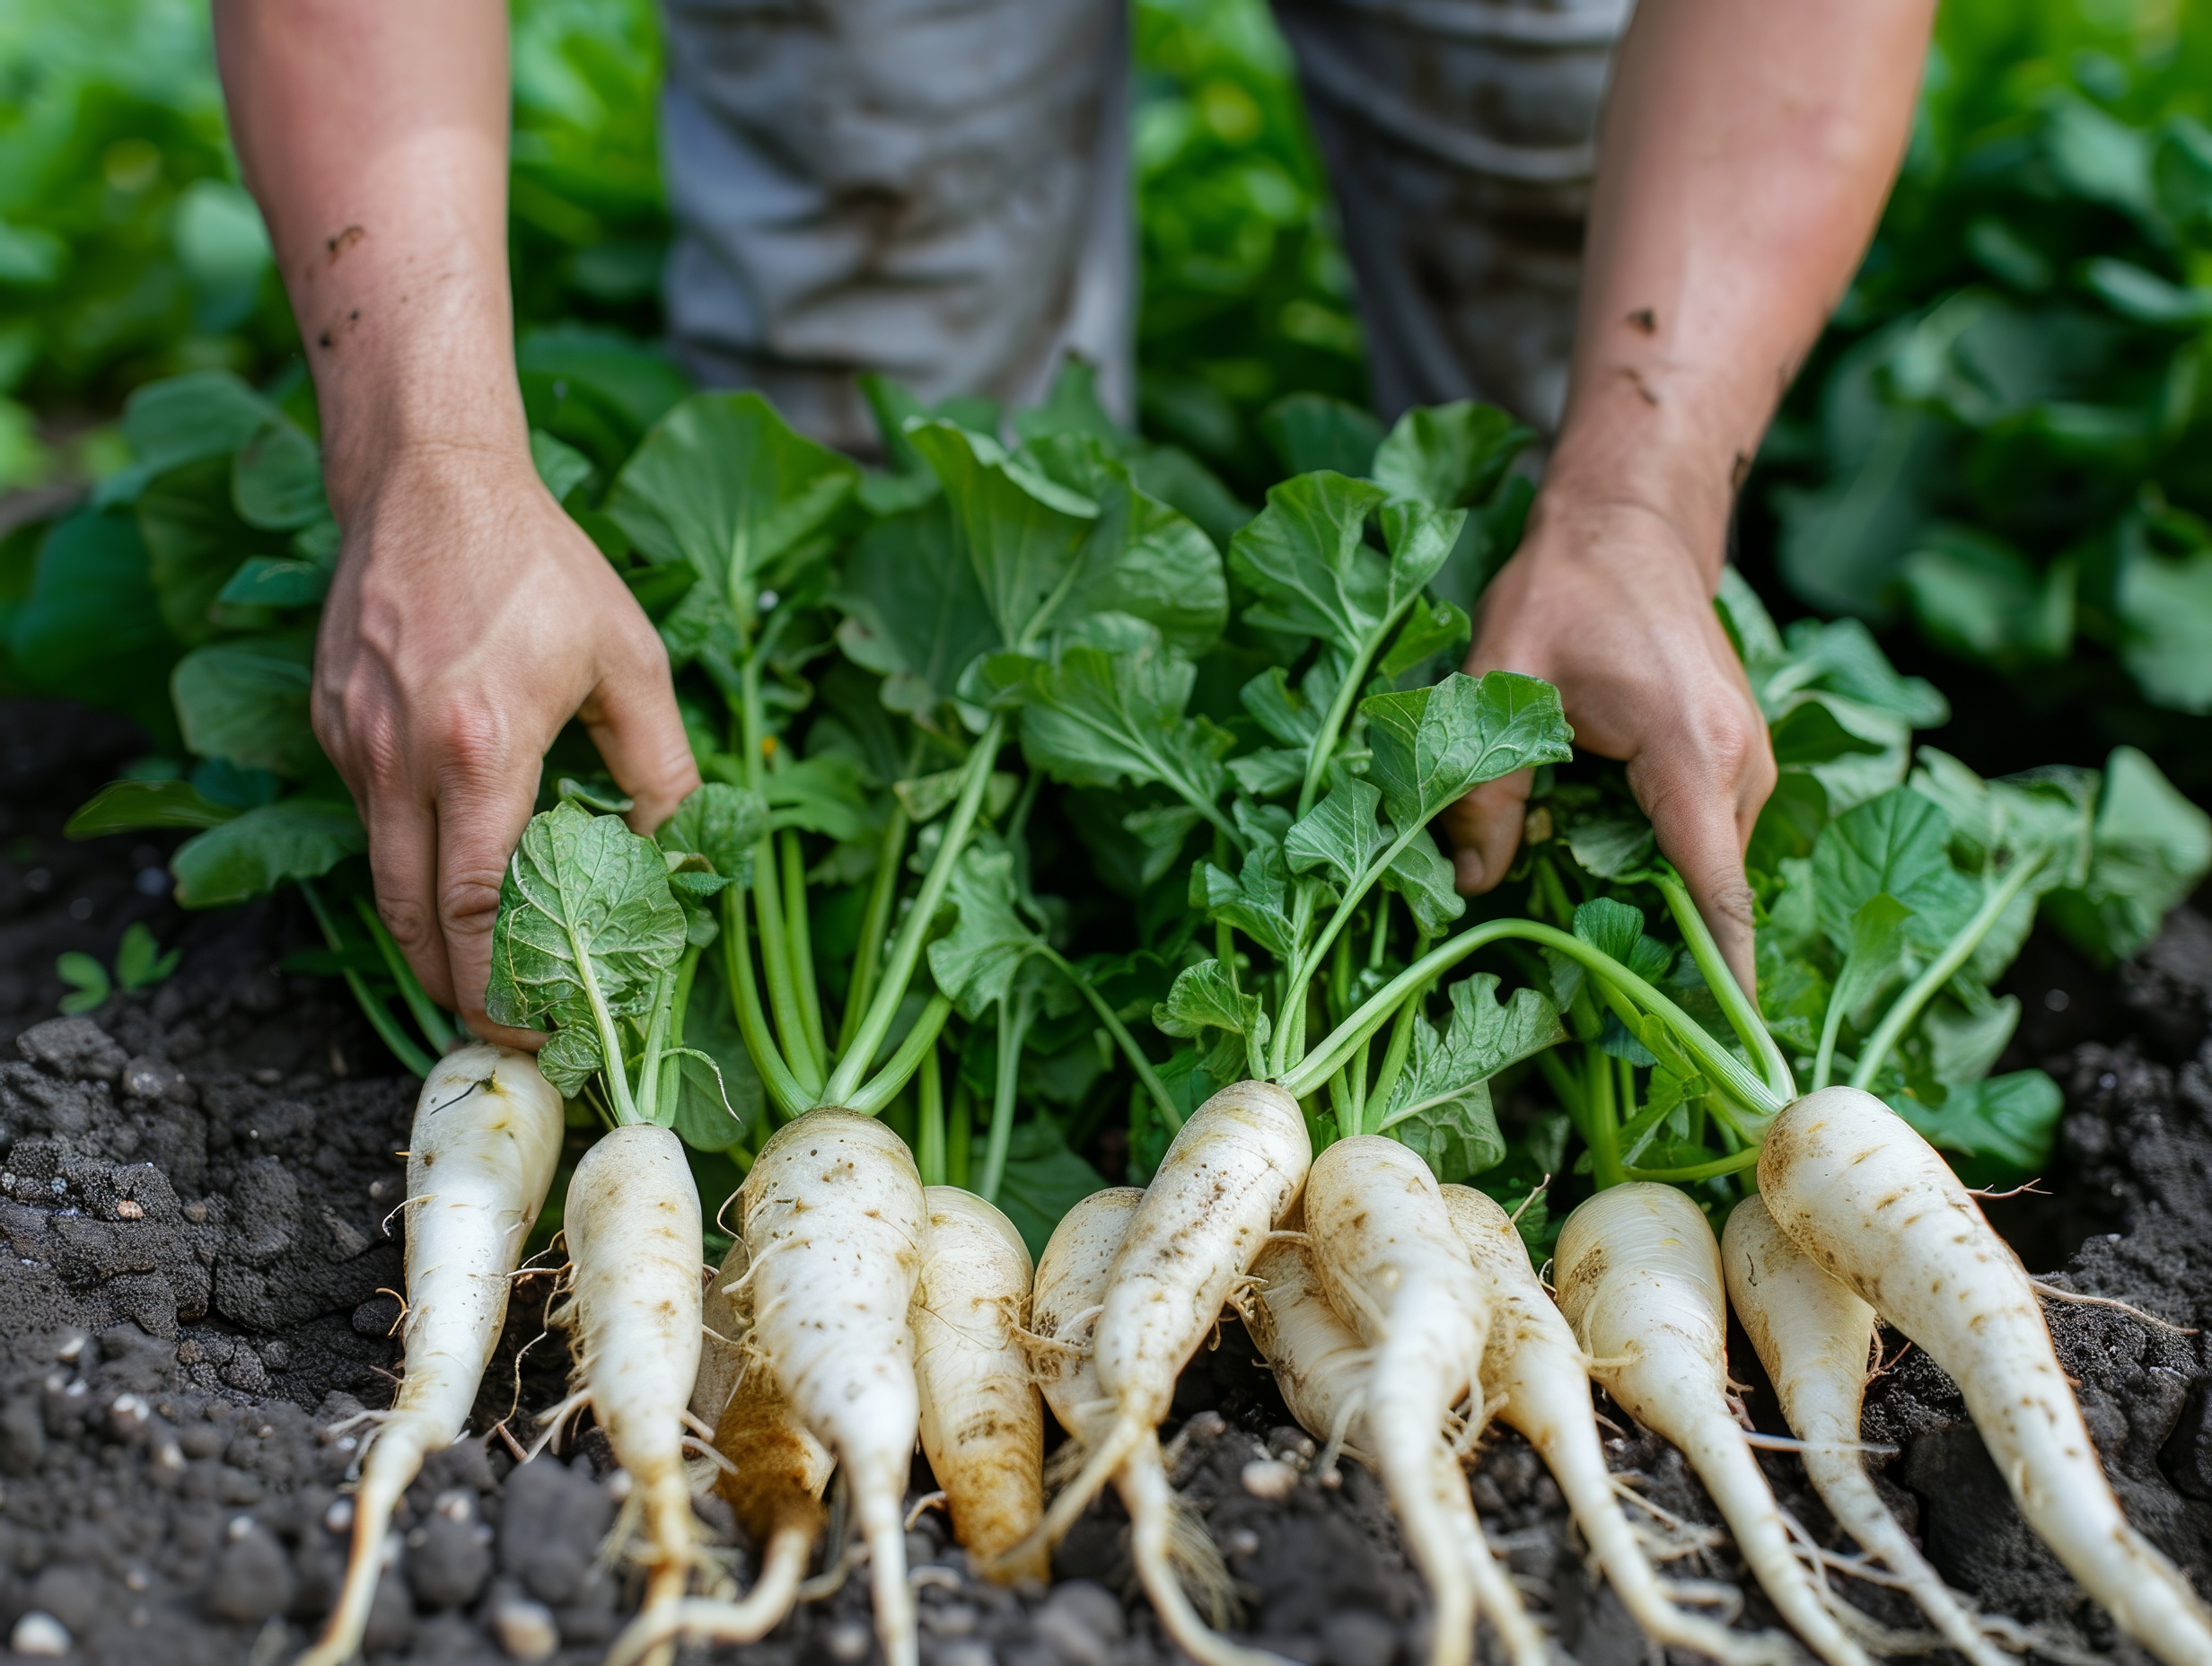 Hands pulling radishes from the radish field